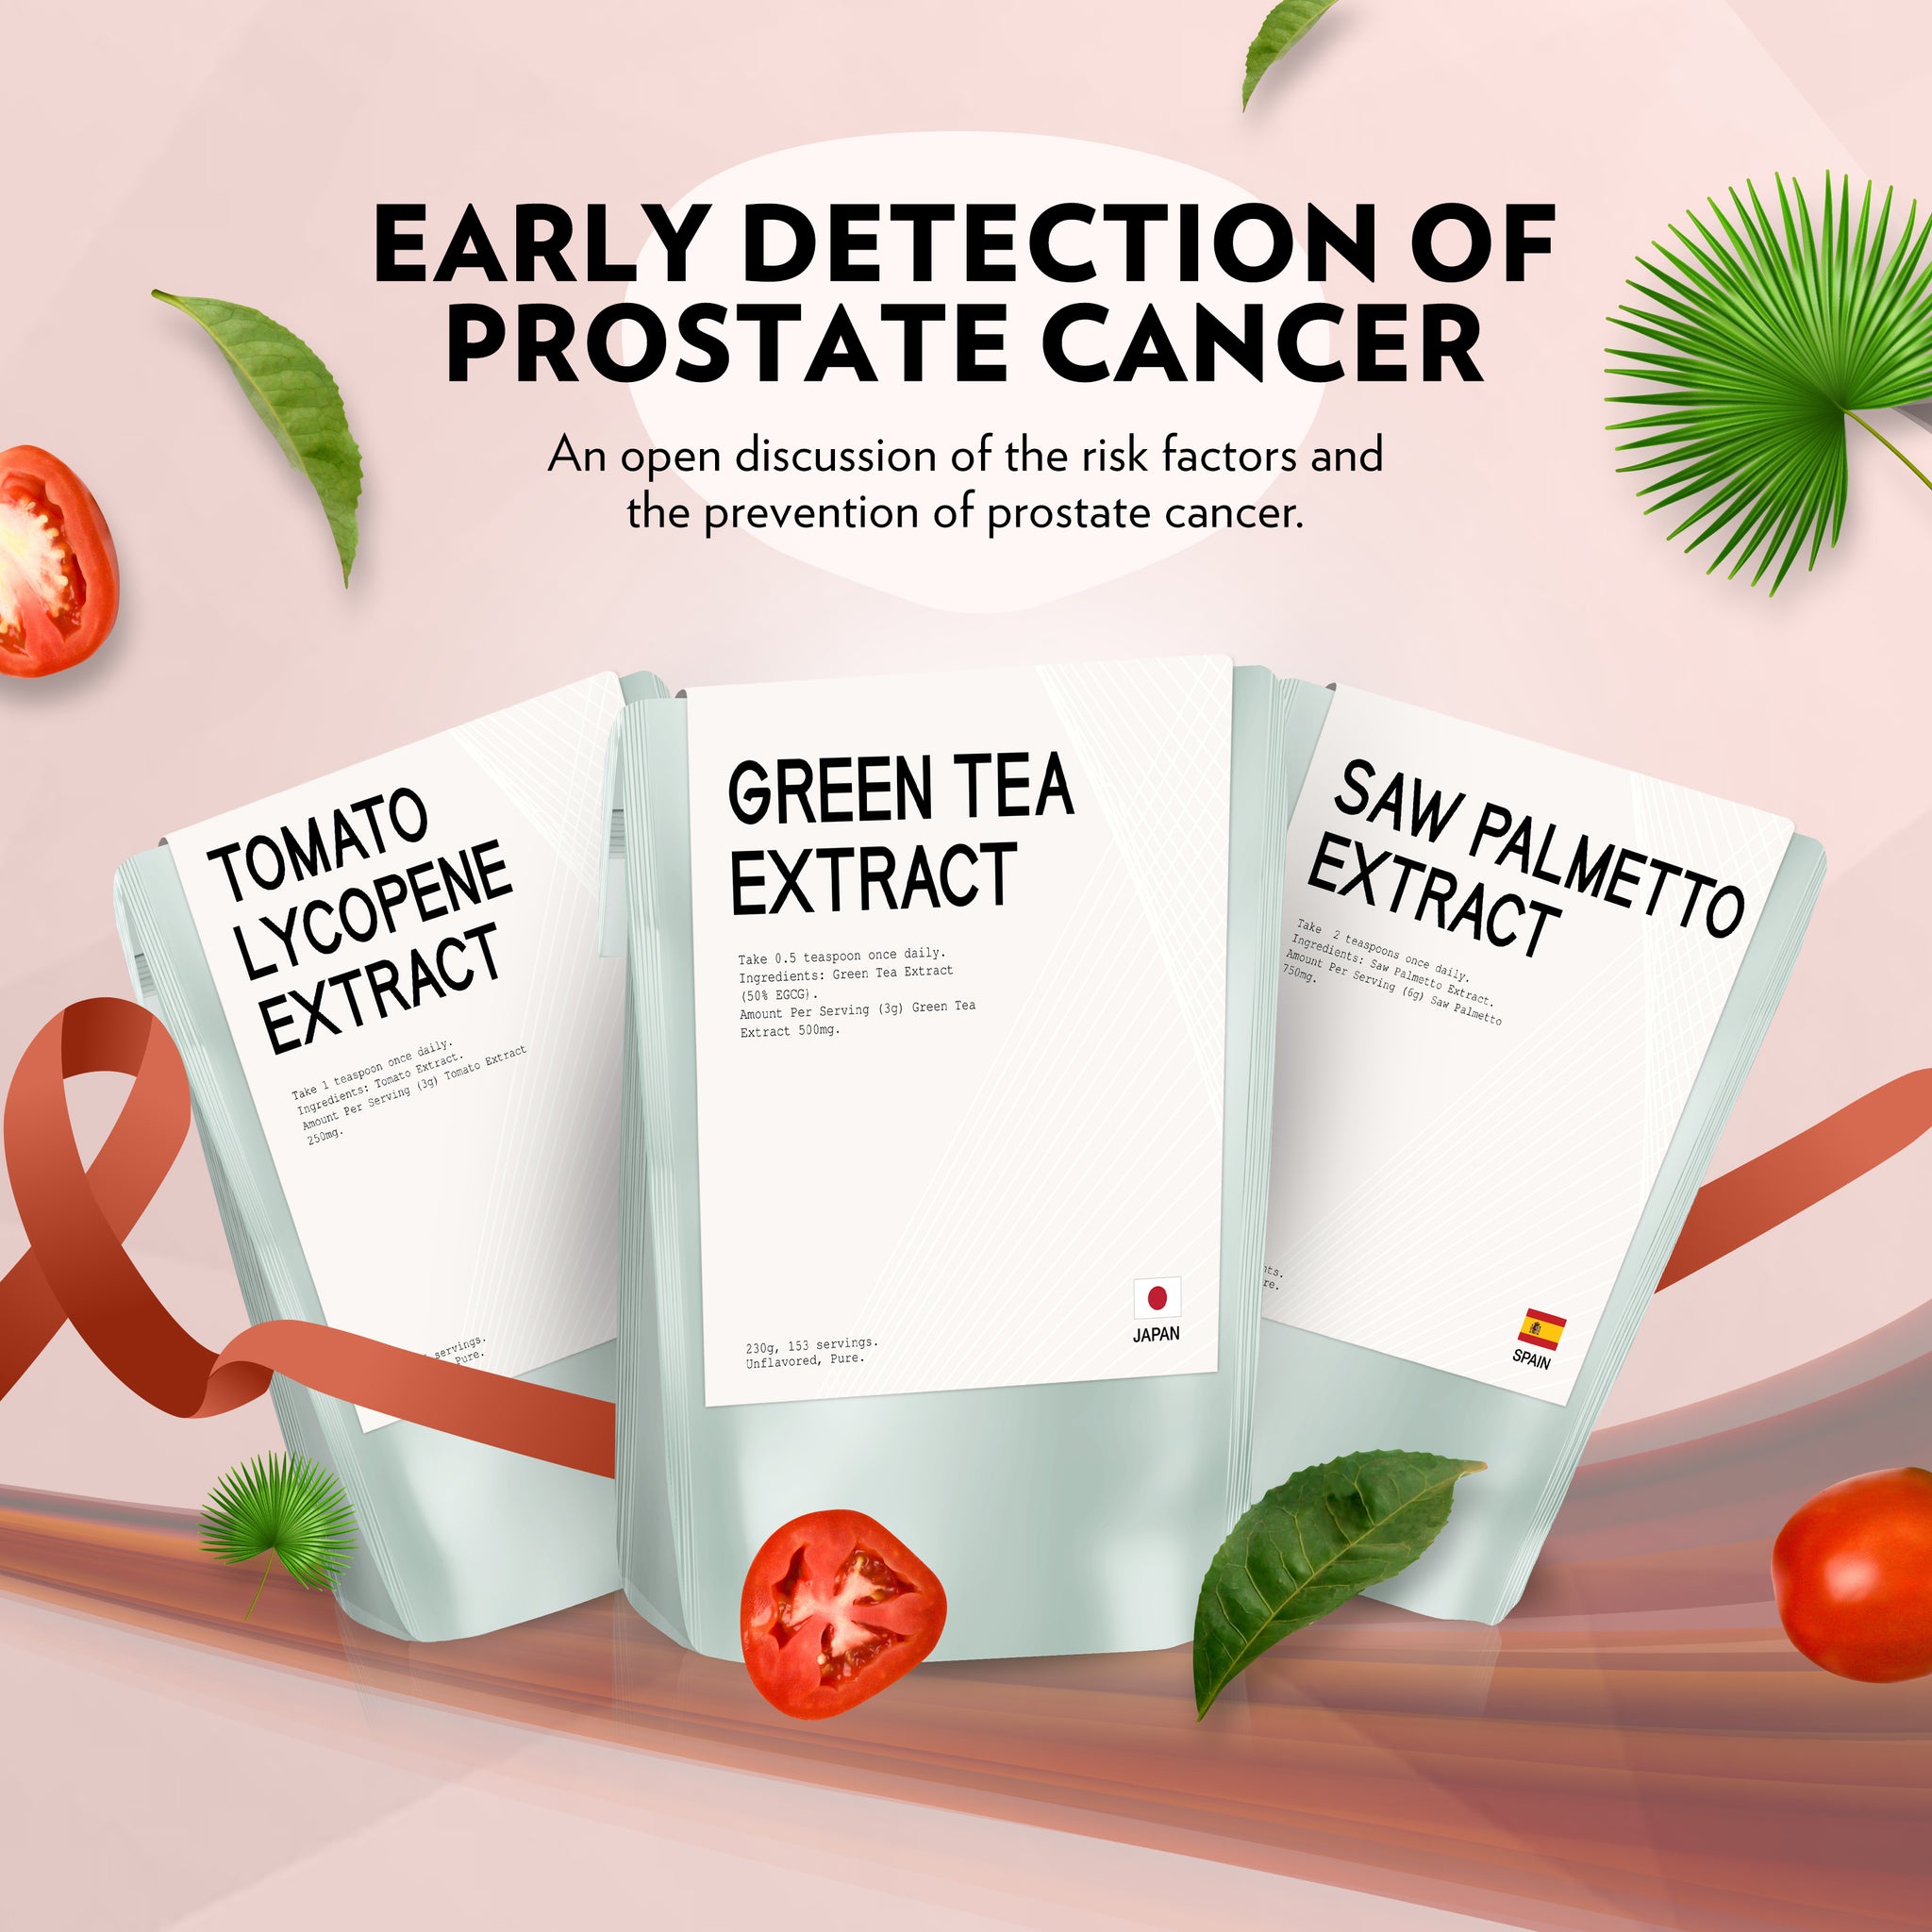 Prostate Cancer: Prevention and Early Detection are Keys